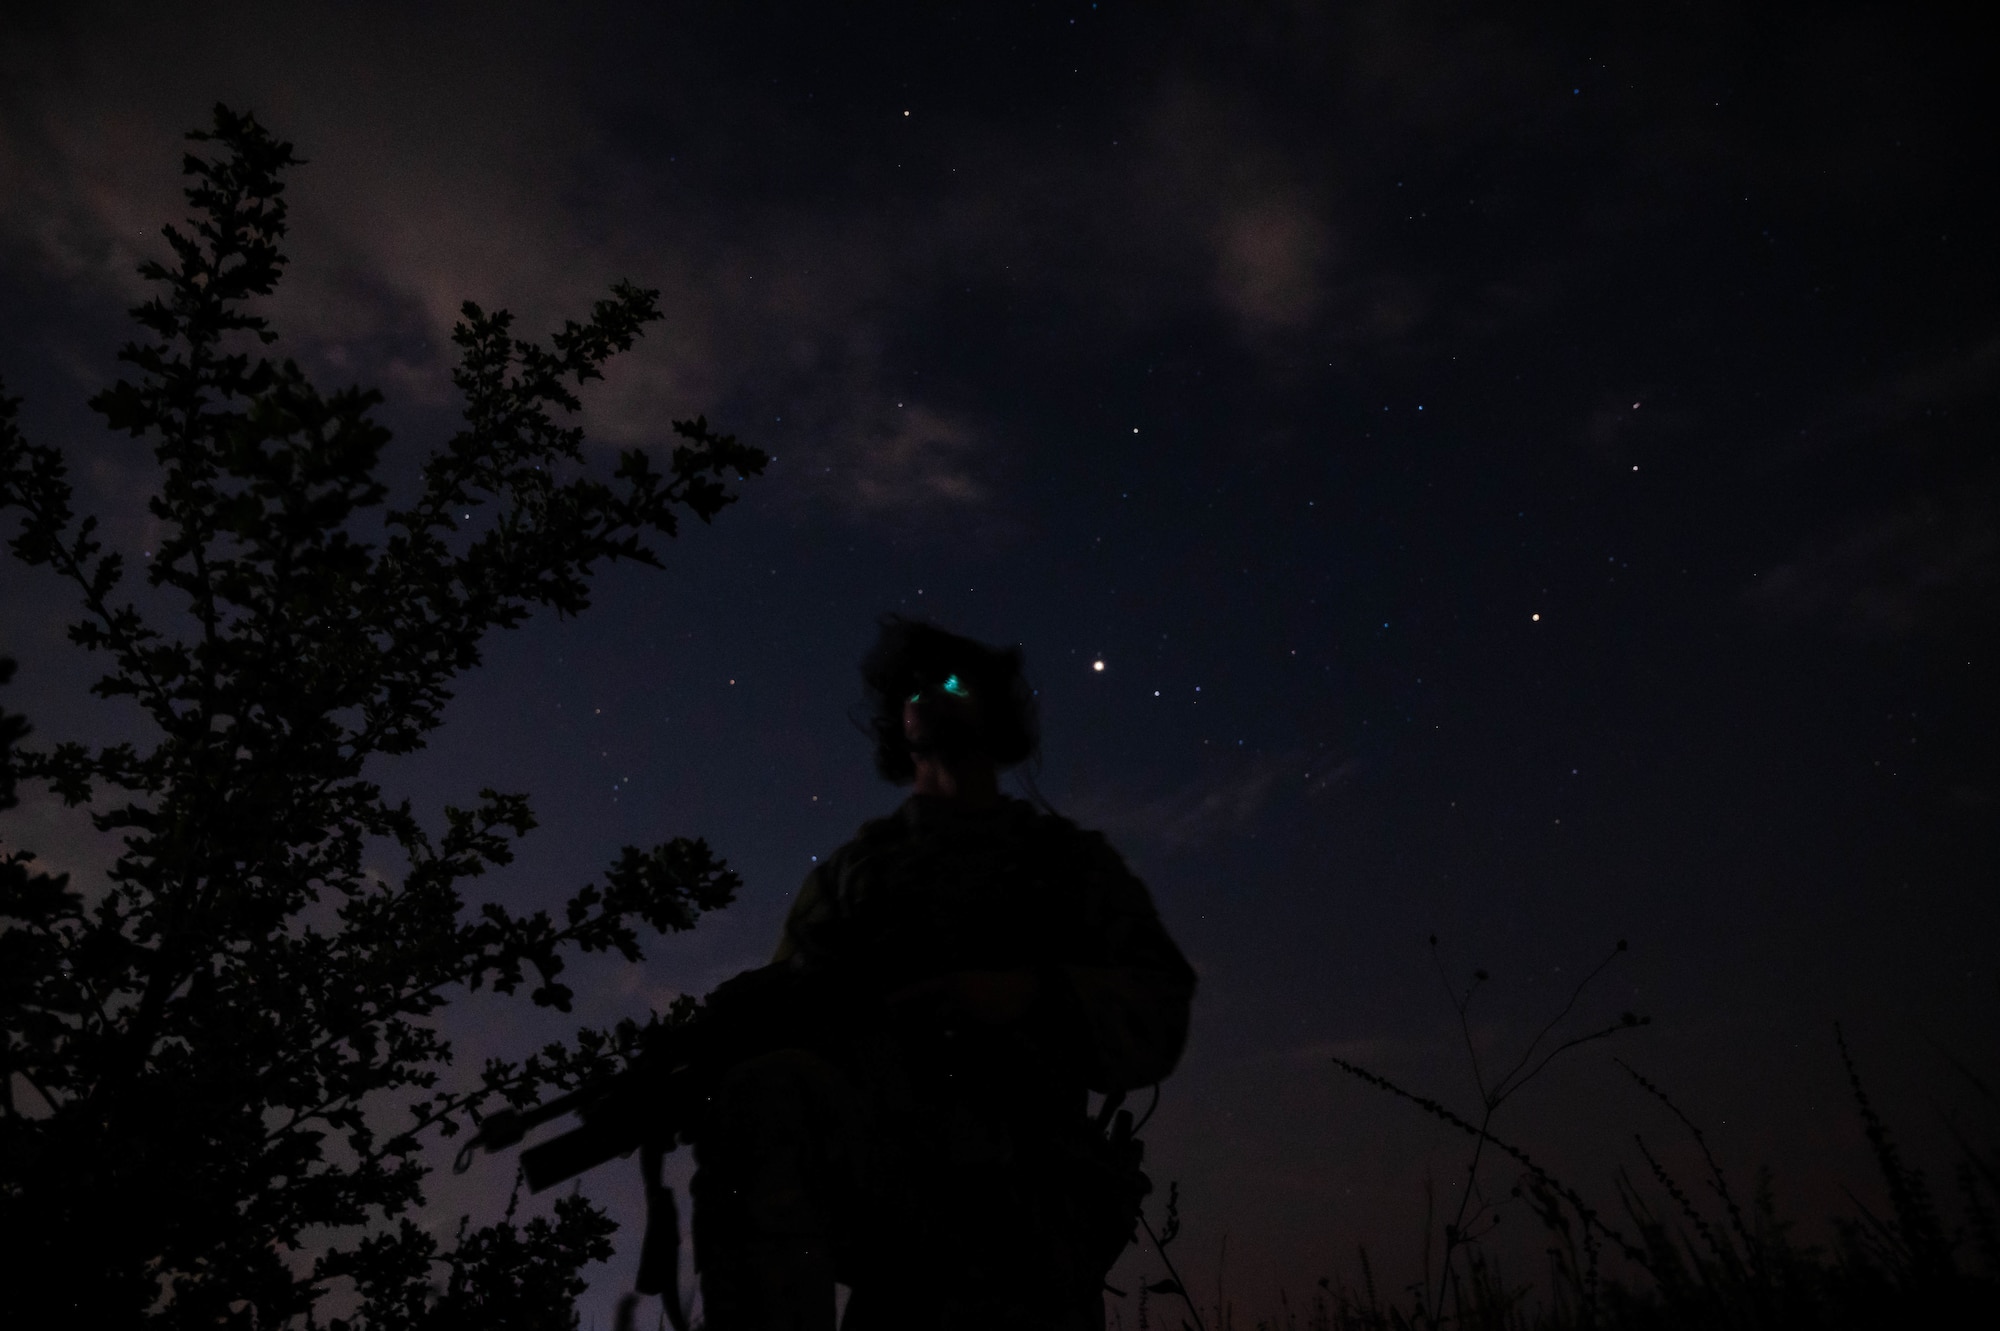 Airman kneels during exercise formation.